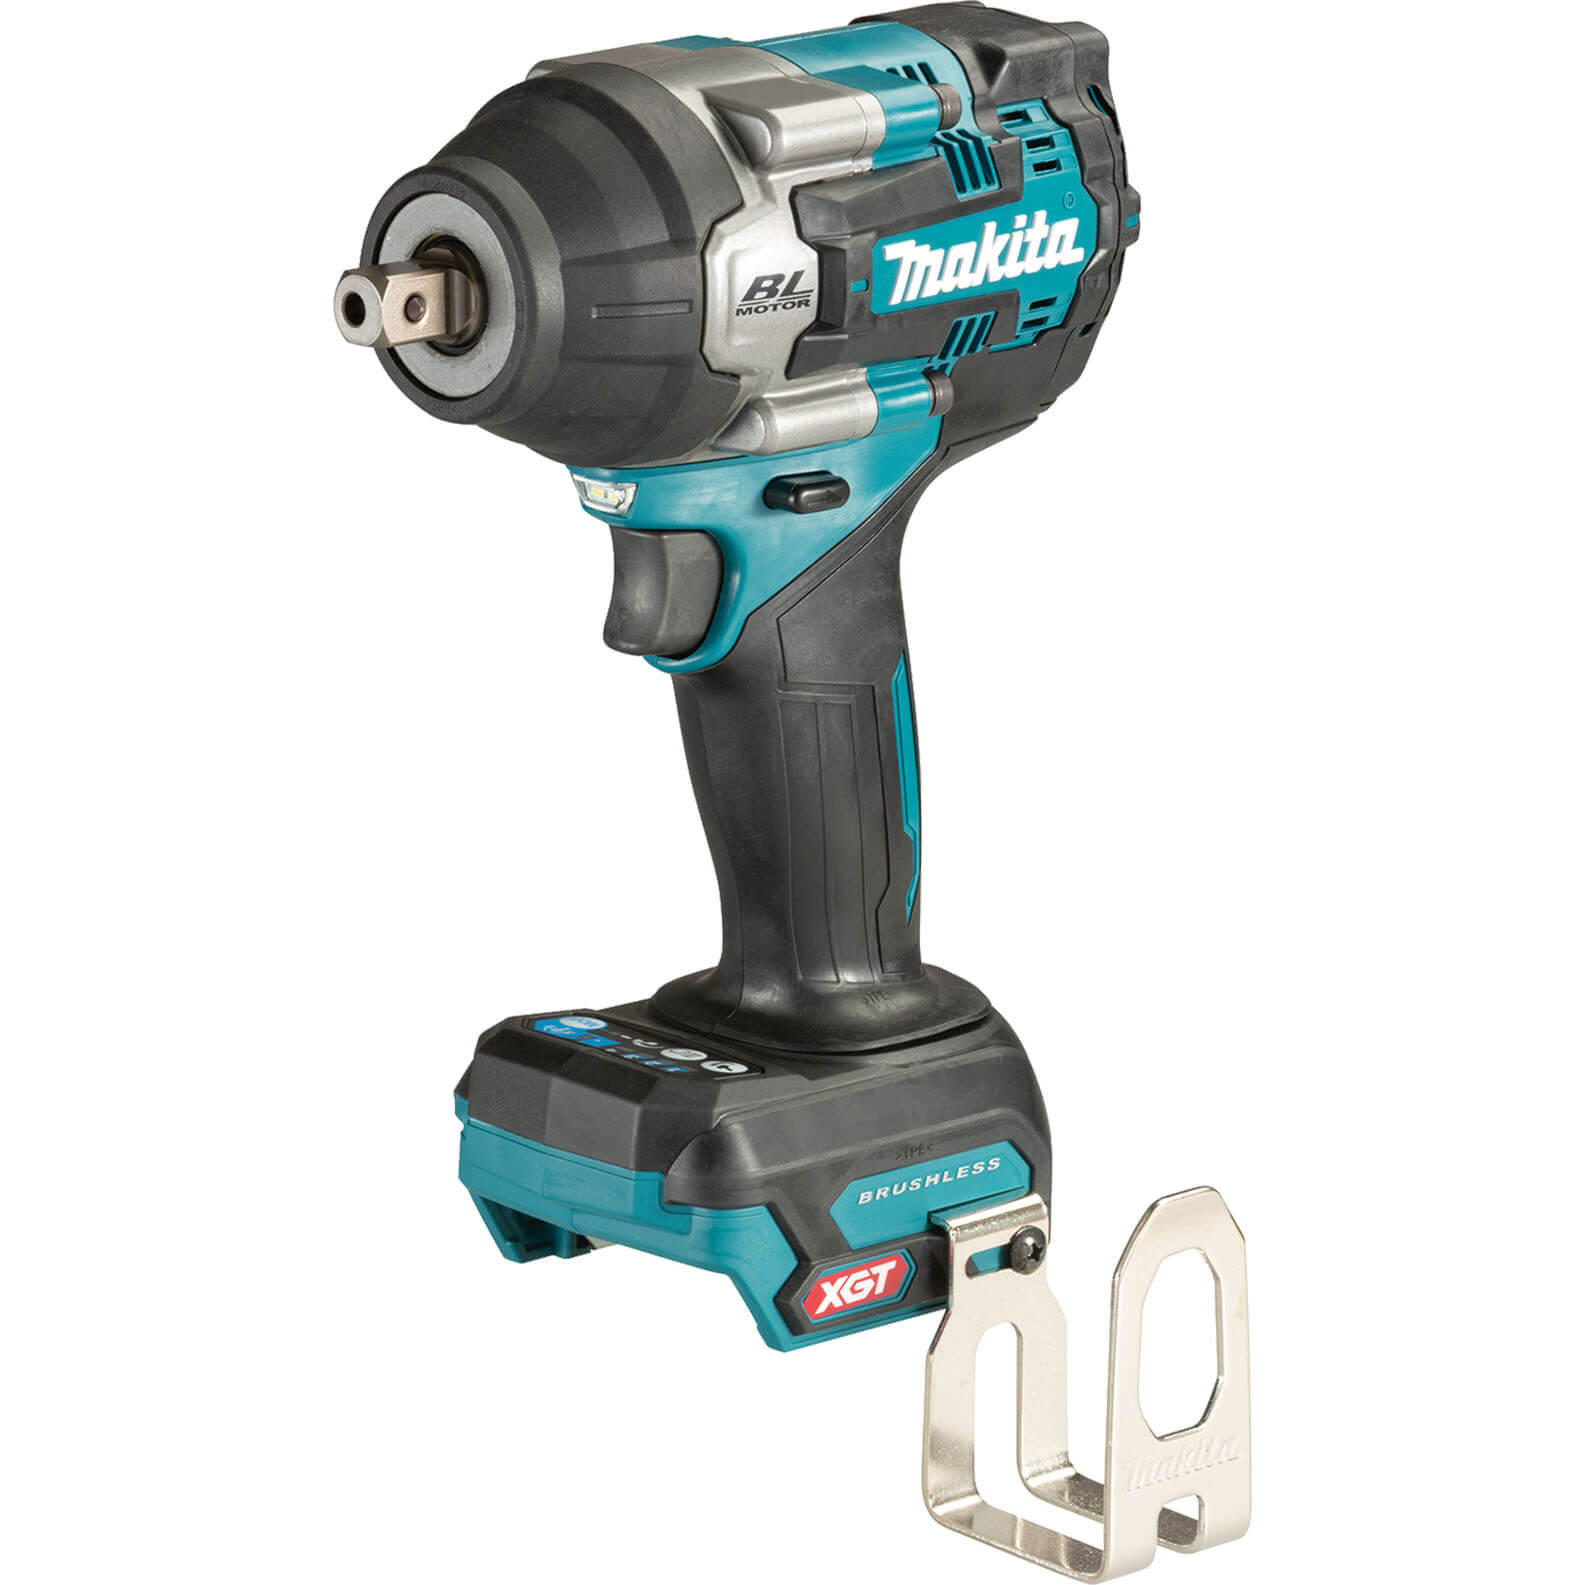 Image of Makita TW008G 40v Max XGT Cordless Brushless 1/2" Drive Impact Wrench No Batteries No Charger No Case